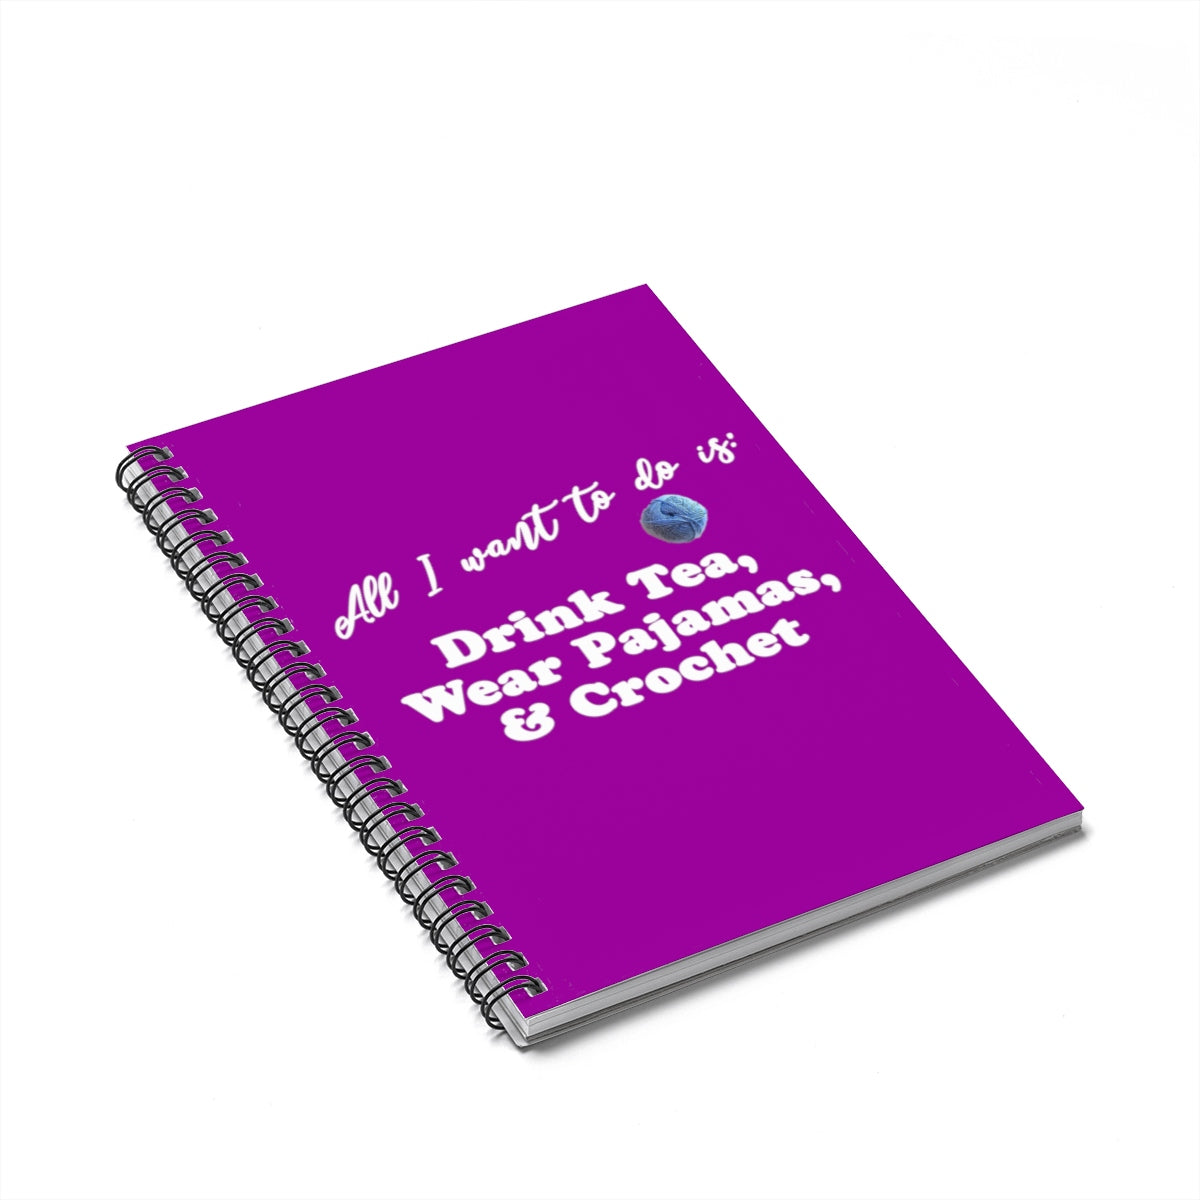 "All Want To Do Is: Drink Tea, Wear Pajamas & Crochet" White Letters - Spiral Notebook - Ruled Line